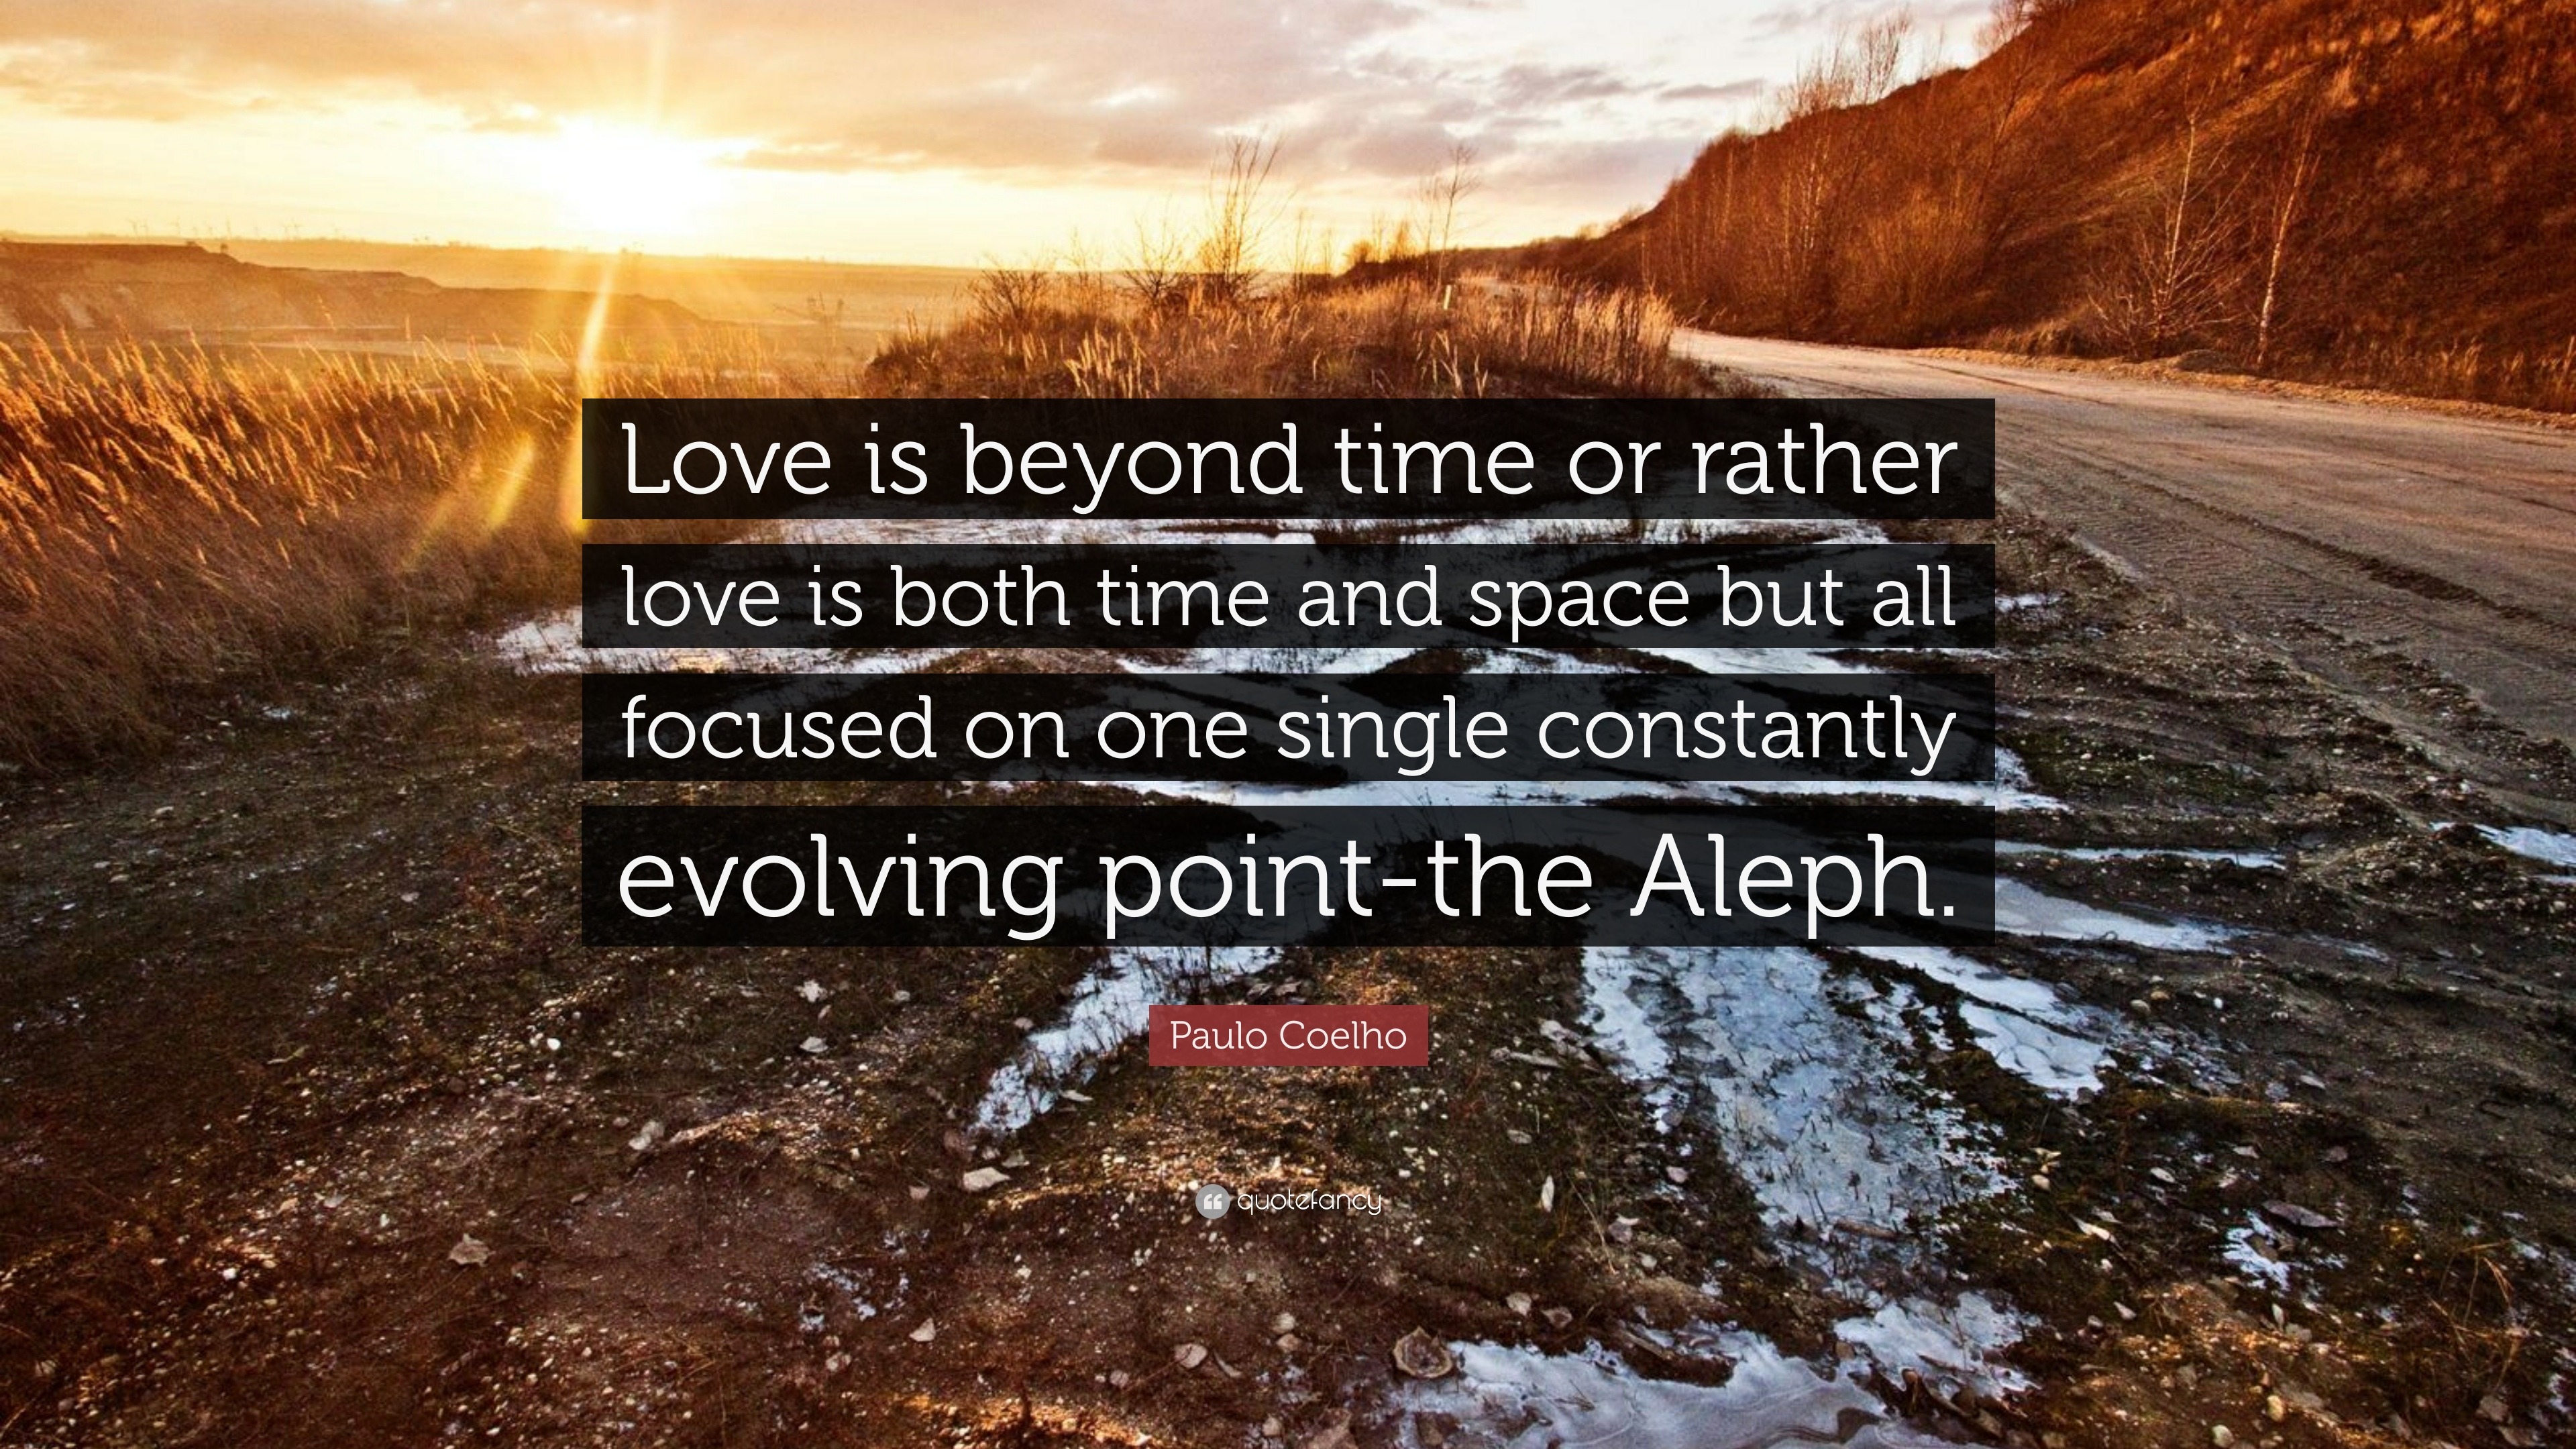 Paulo Coelho Quote “Love is beyond time or rather love is both time and